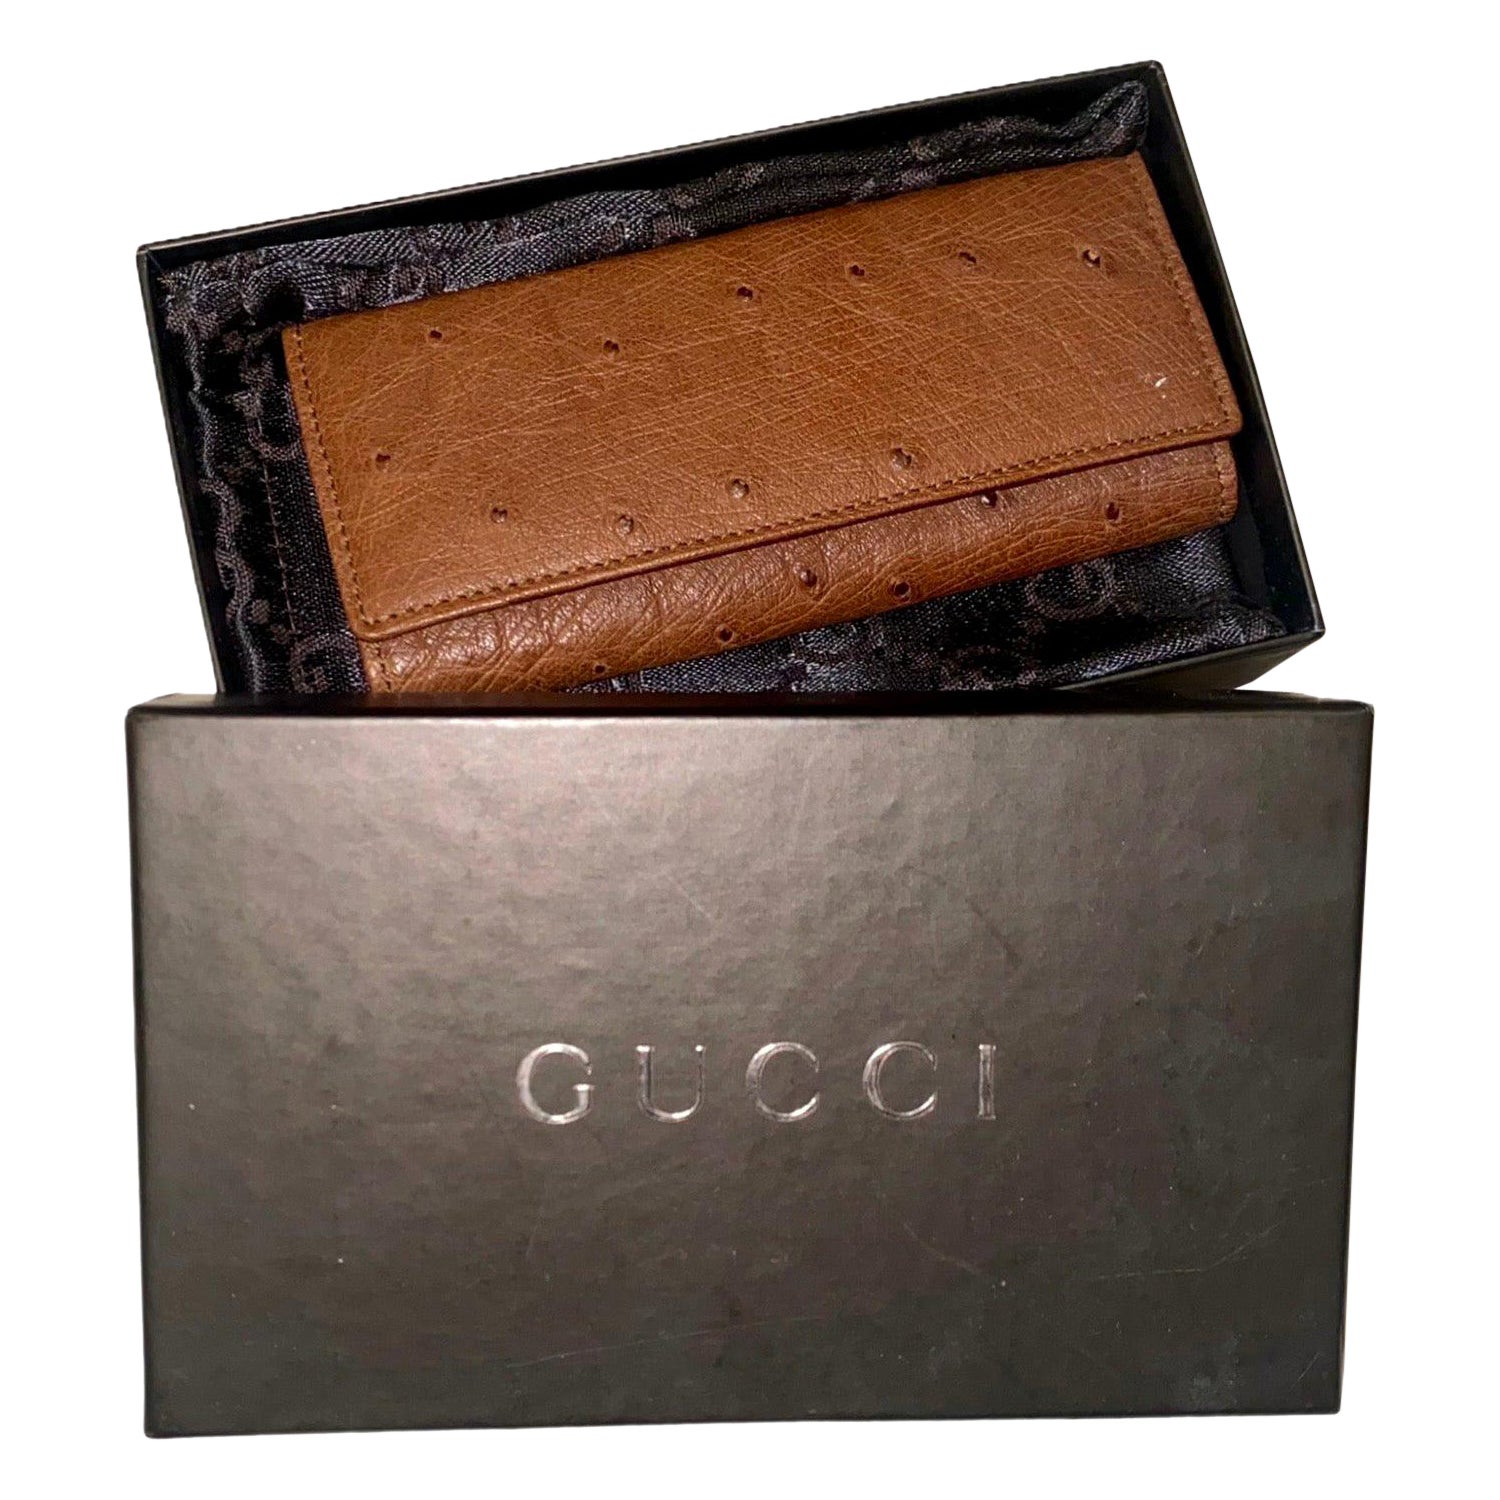 How can I tell if a vintage Gucci bag is real?